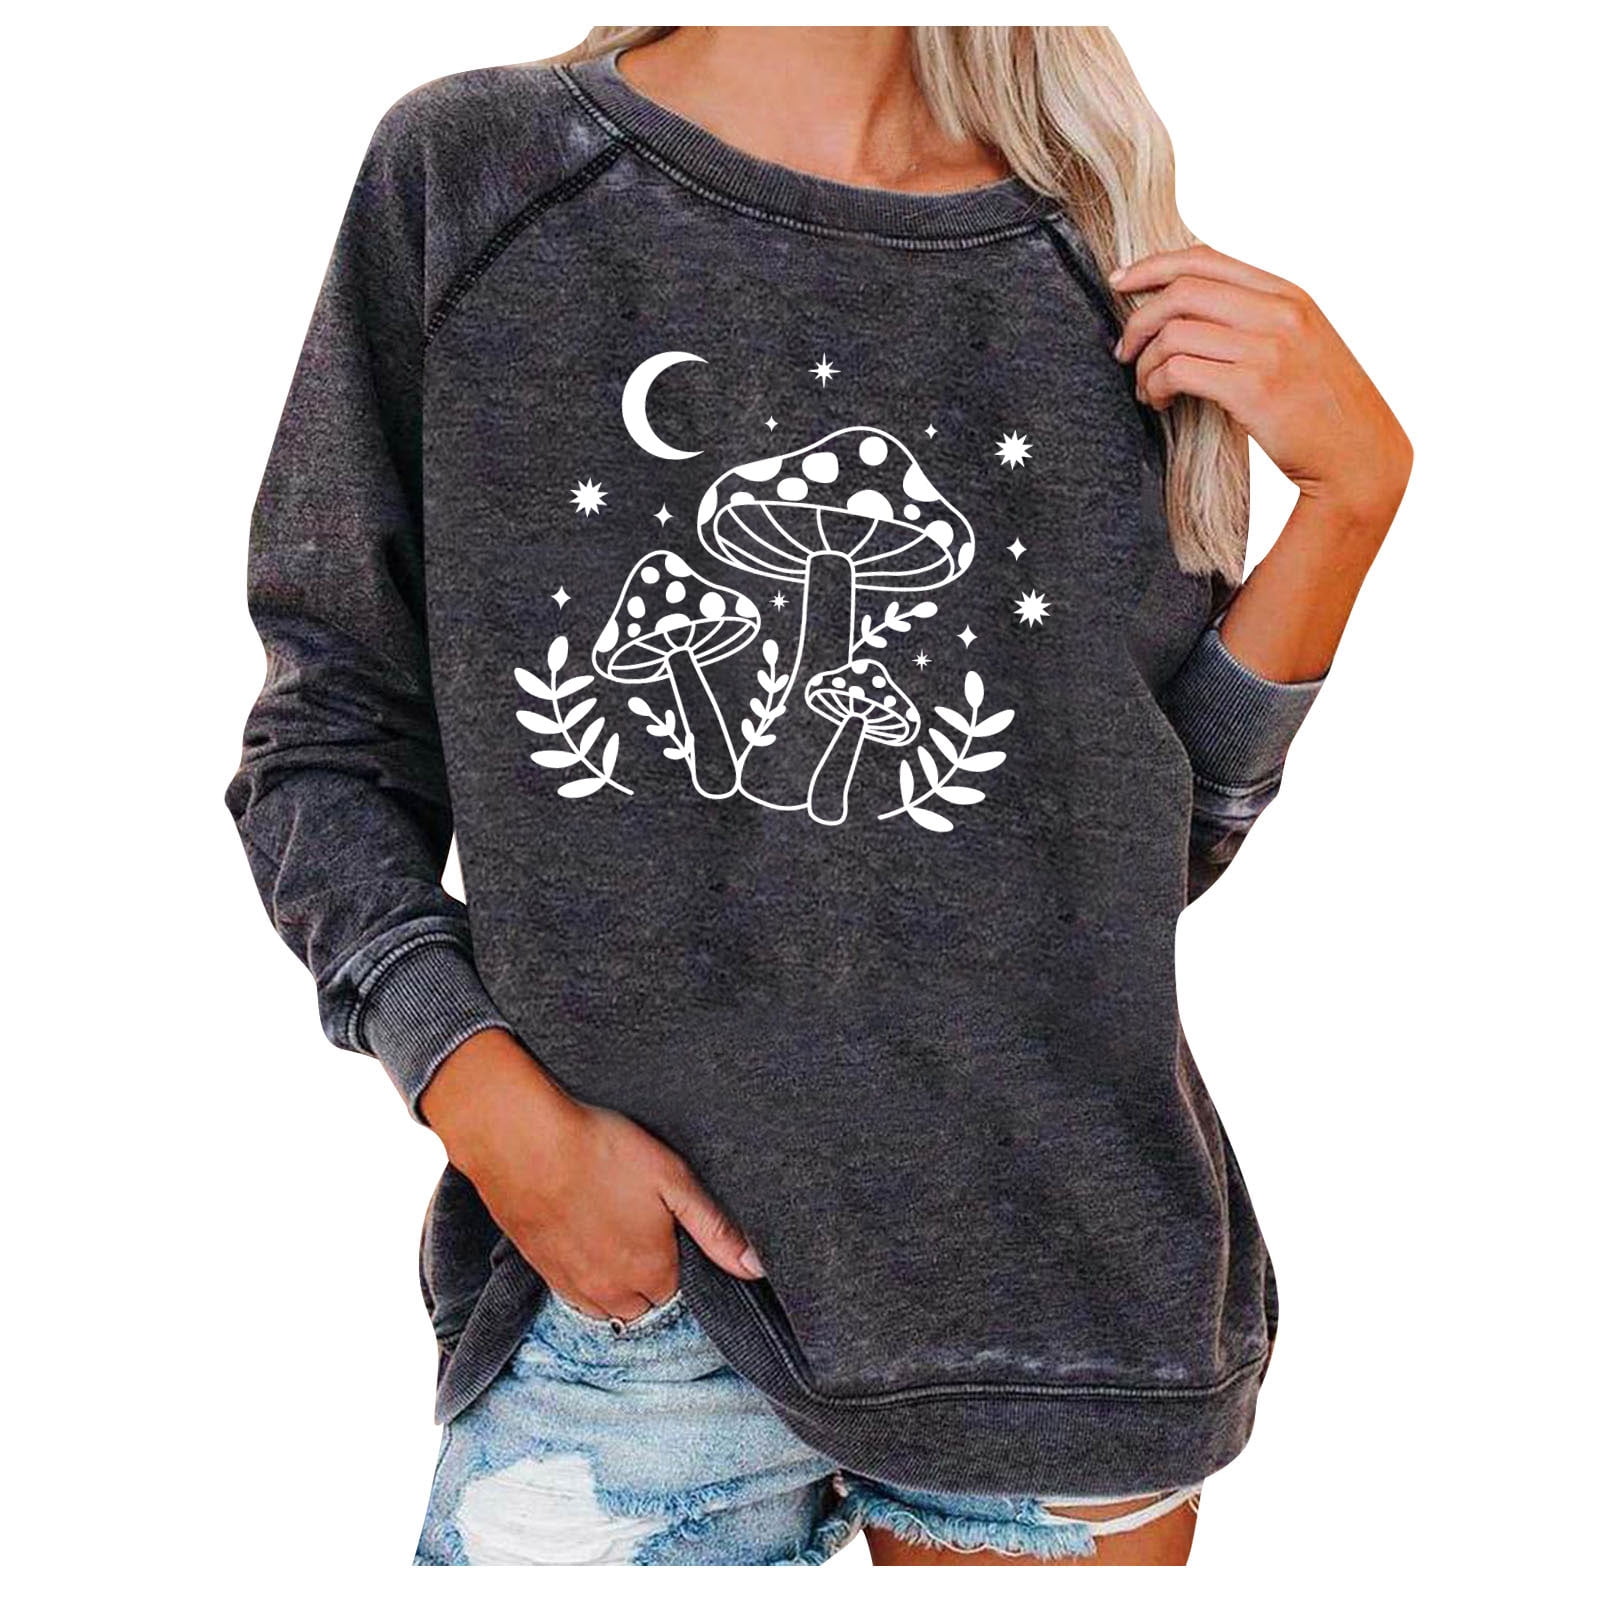 Sun and Moon Graphic Sweatshirt for Womens Vintage Crewneck Blouse Long Sleeve Pullover Oversized Tops 